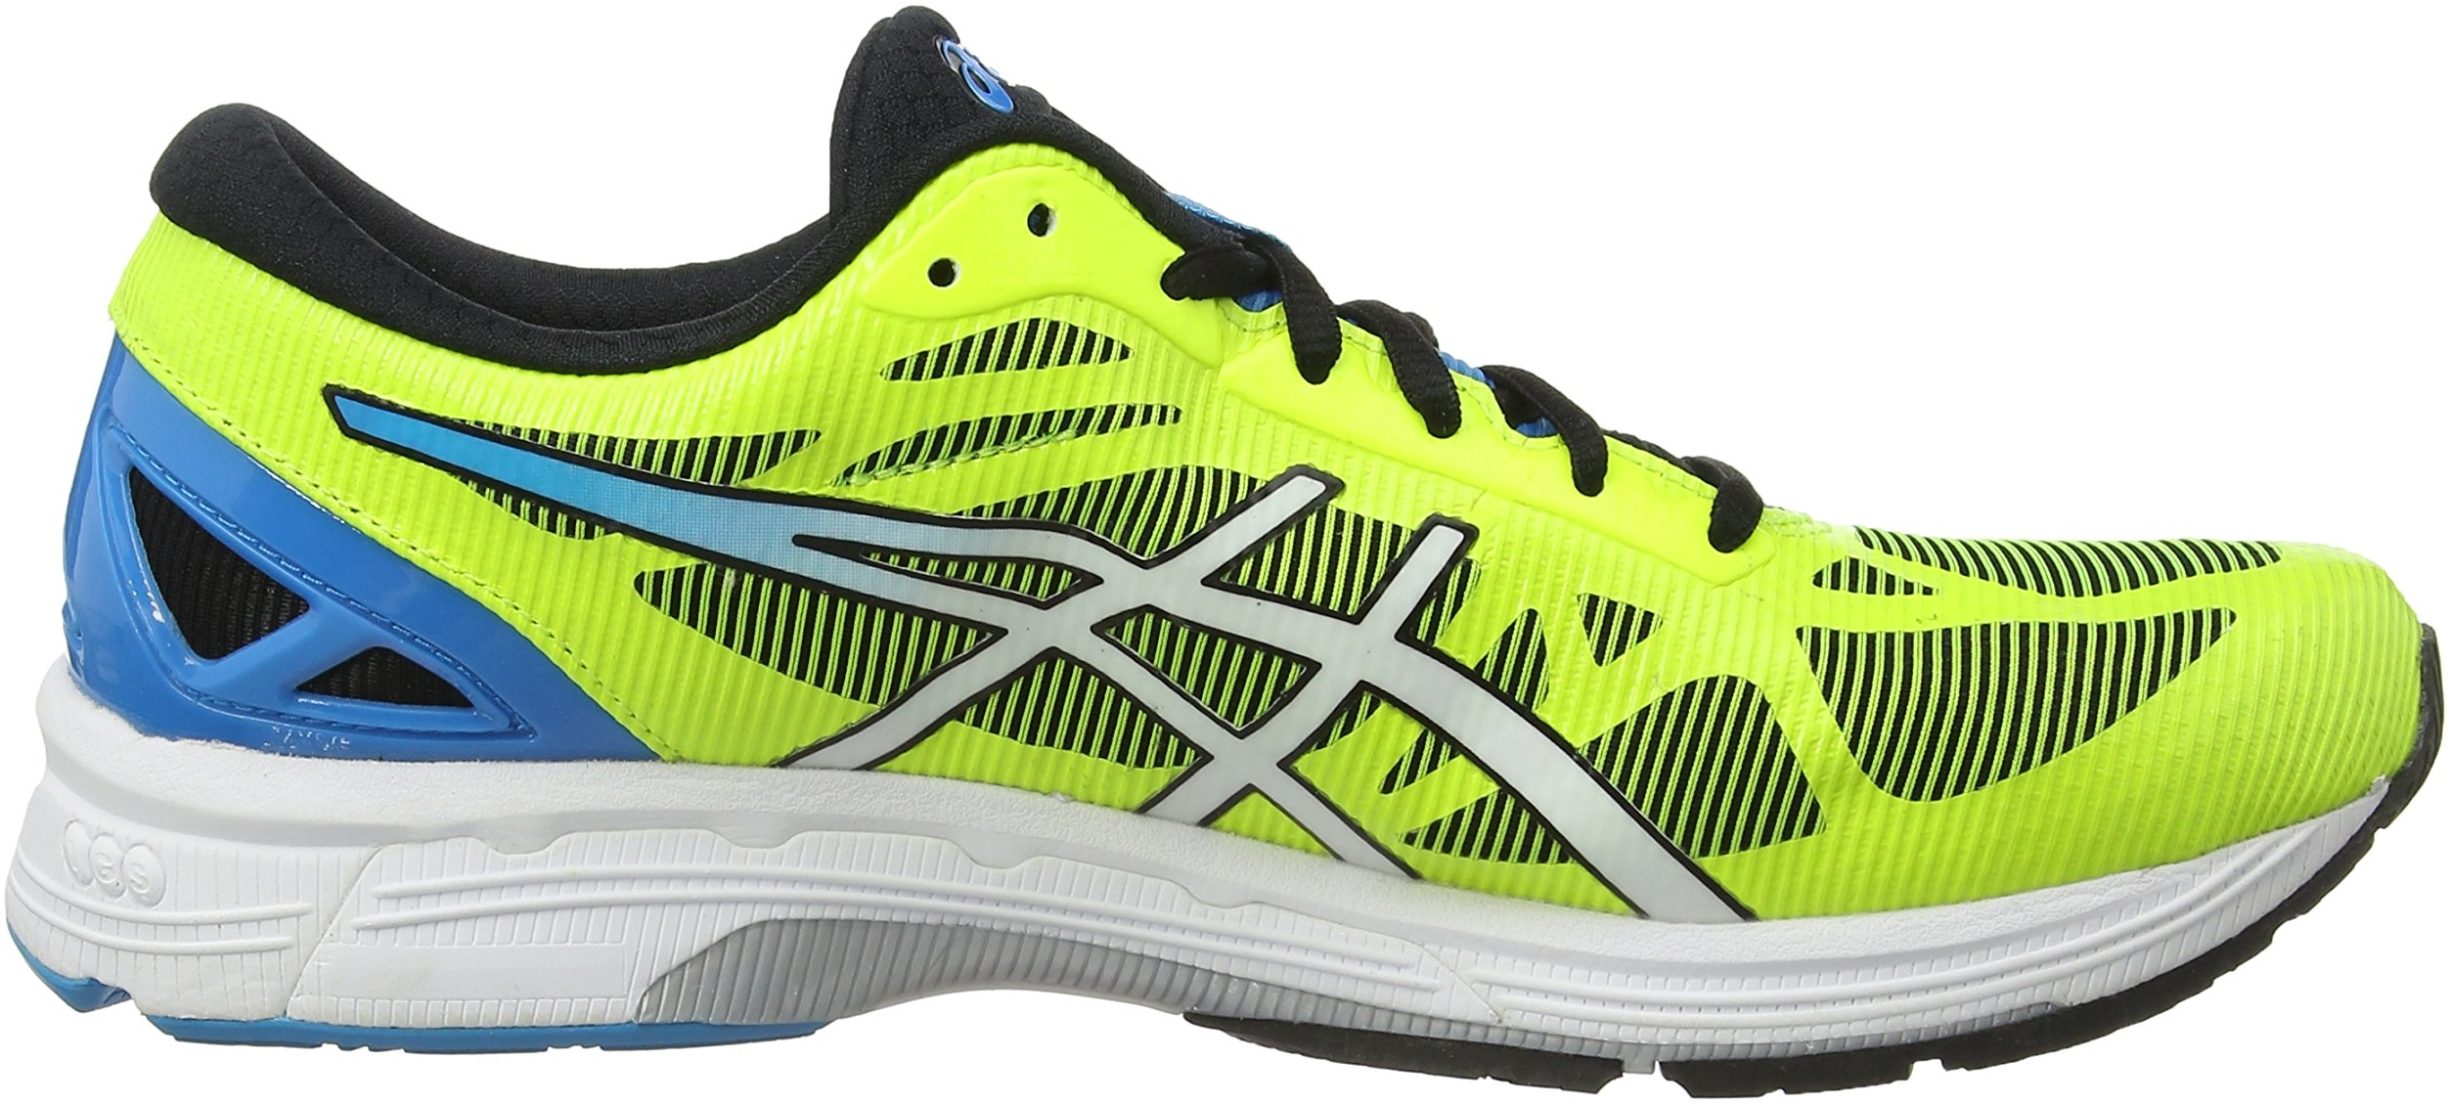 9 Reasons To Not To Buy Asics Gel Ds Trainer Apr 21 Runrepeat